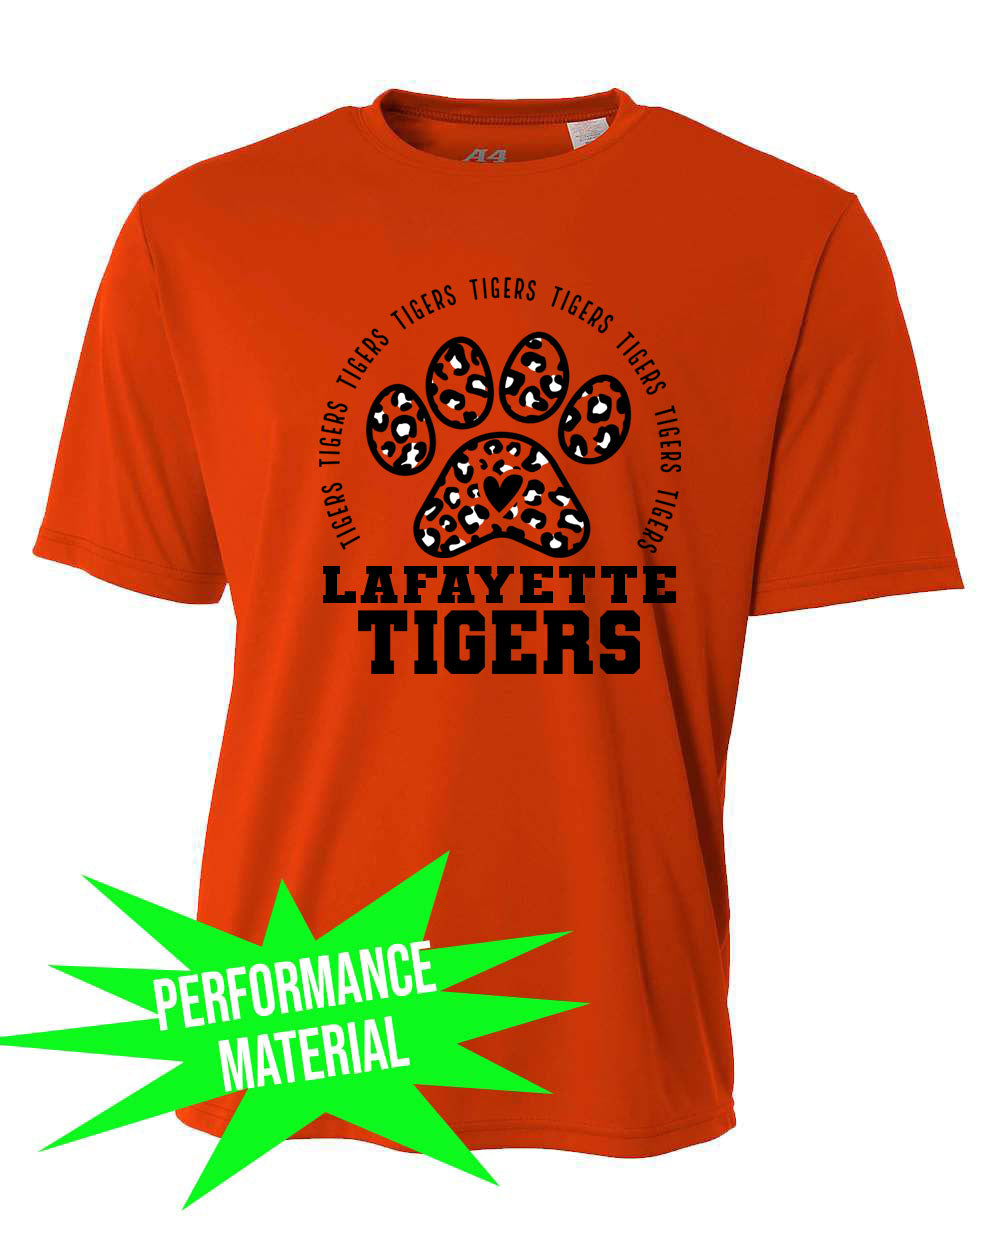 Tigers Design 9 Performance Material T-Shirt